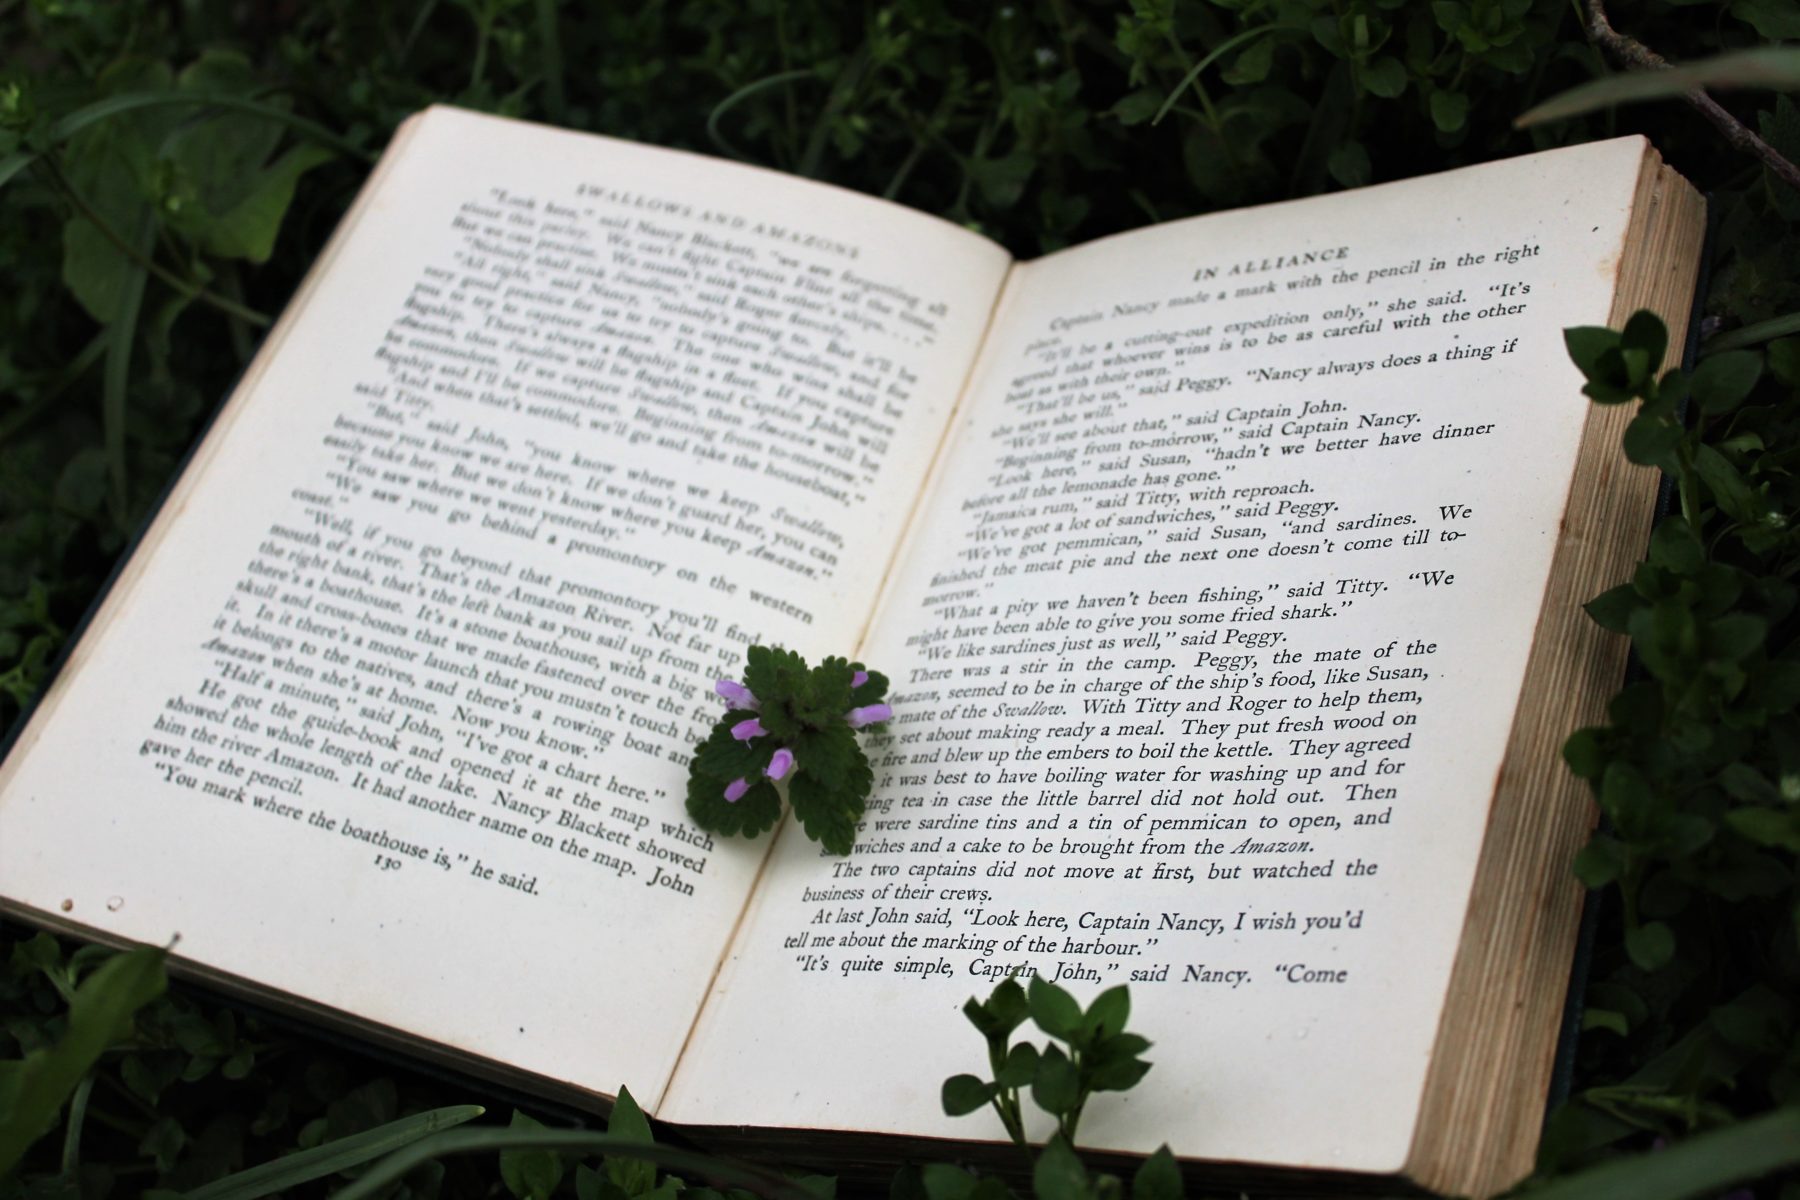 Image of an open book nestled in a flowerbed